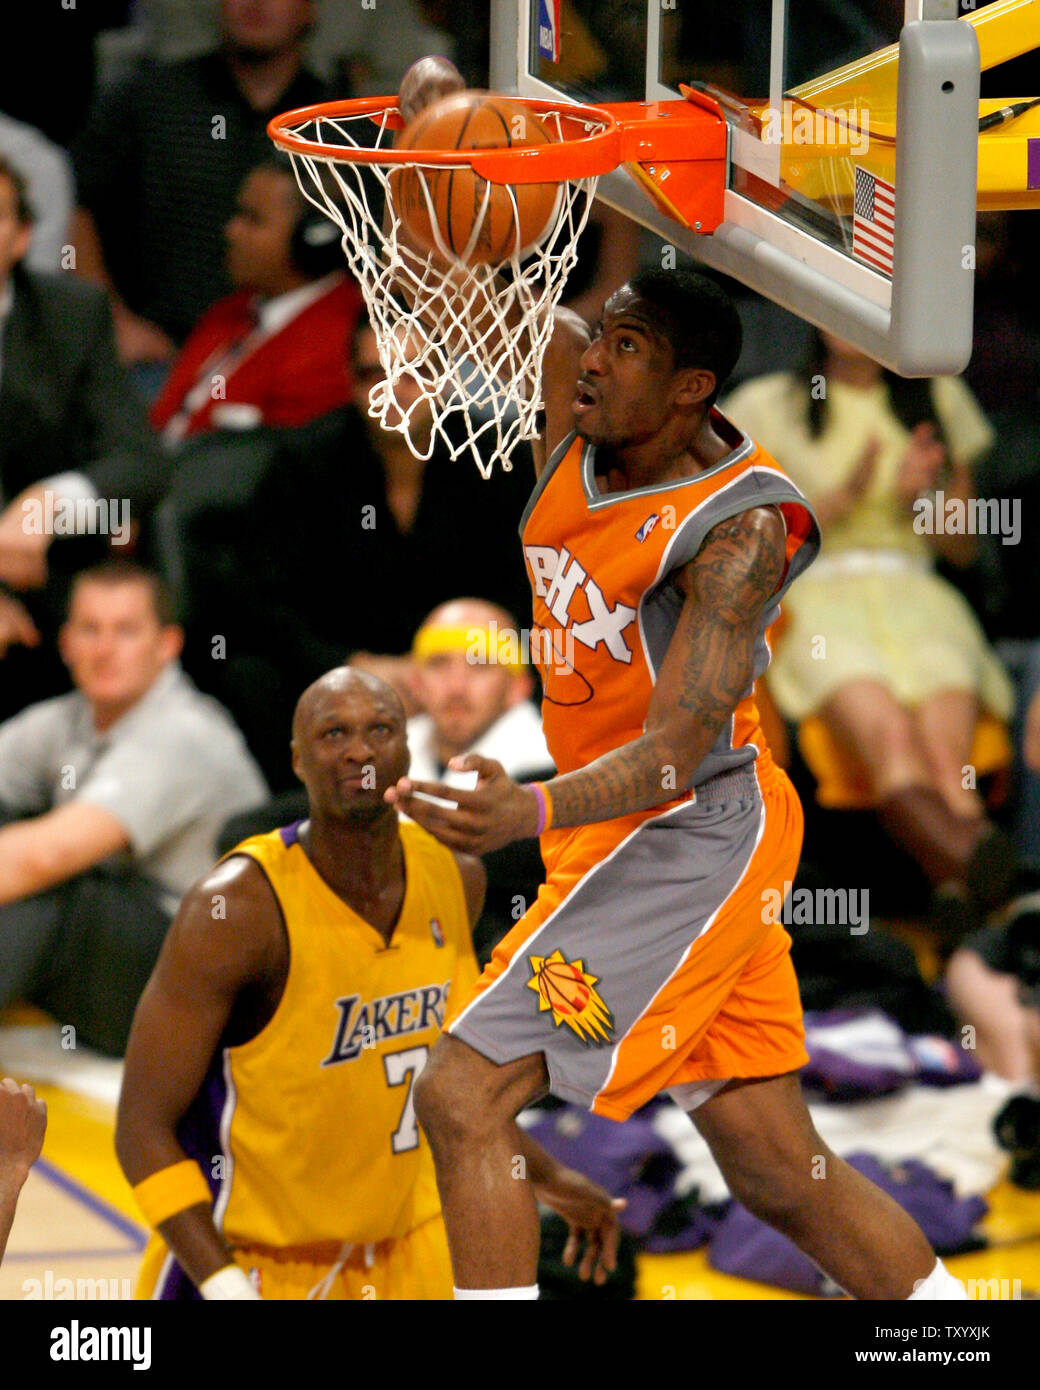 Phoenix Suns'  Center Amare Stoudemire (1)  dunks over Los Angeles Lakers' forward Lamar Odom (7)  during second quarter action of game three of their Western Conference quarterfinals at Staples Center in Los Angeles on April 26, 2007. The Lakers beat the Suns 95-89. (UPI Photo/Jon SooHoo) Stock Photo